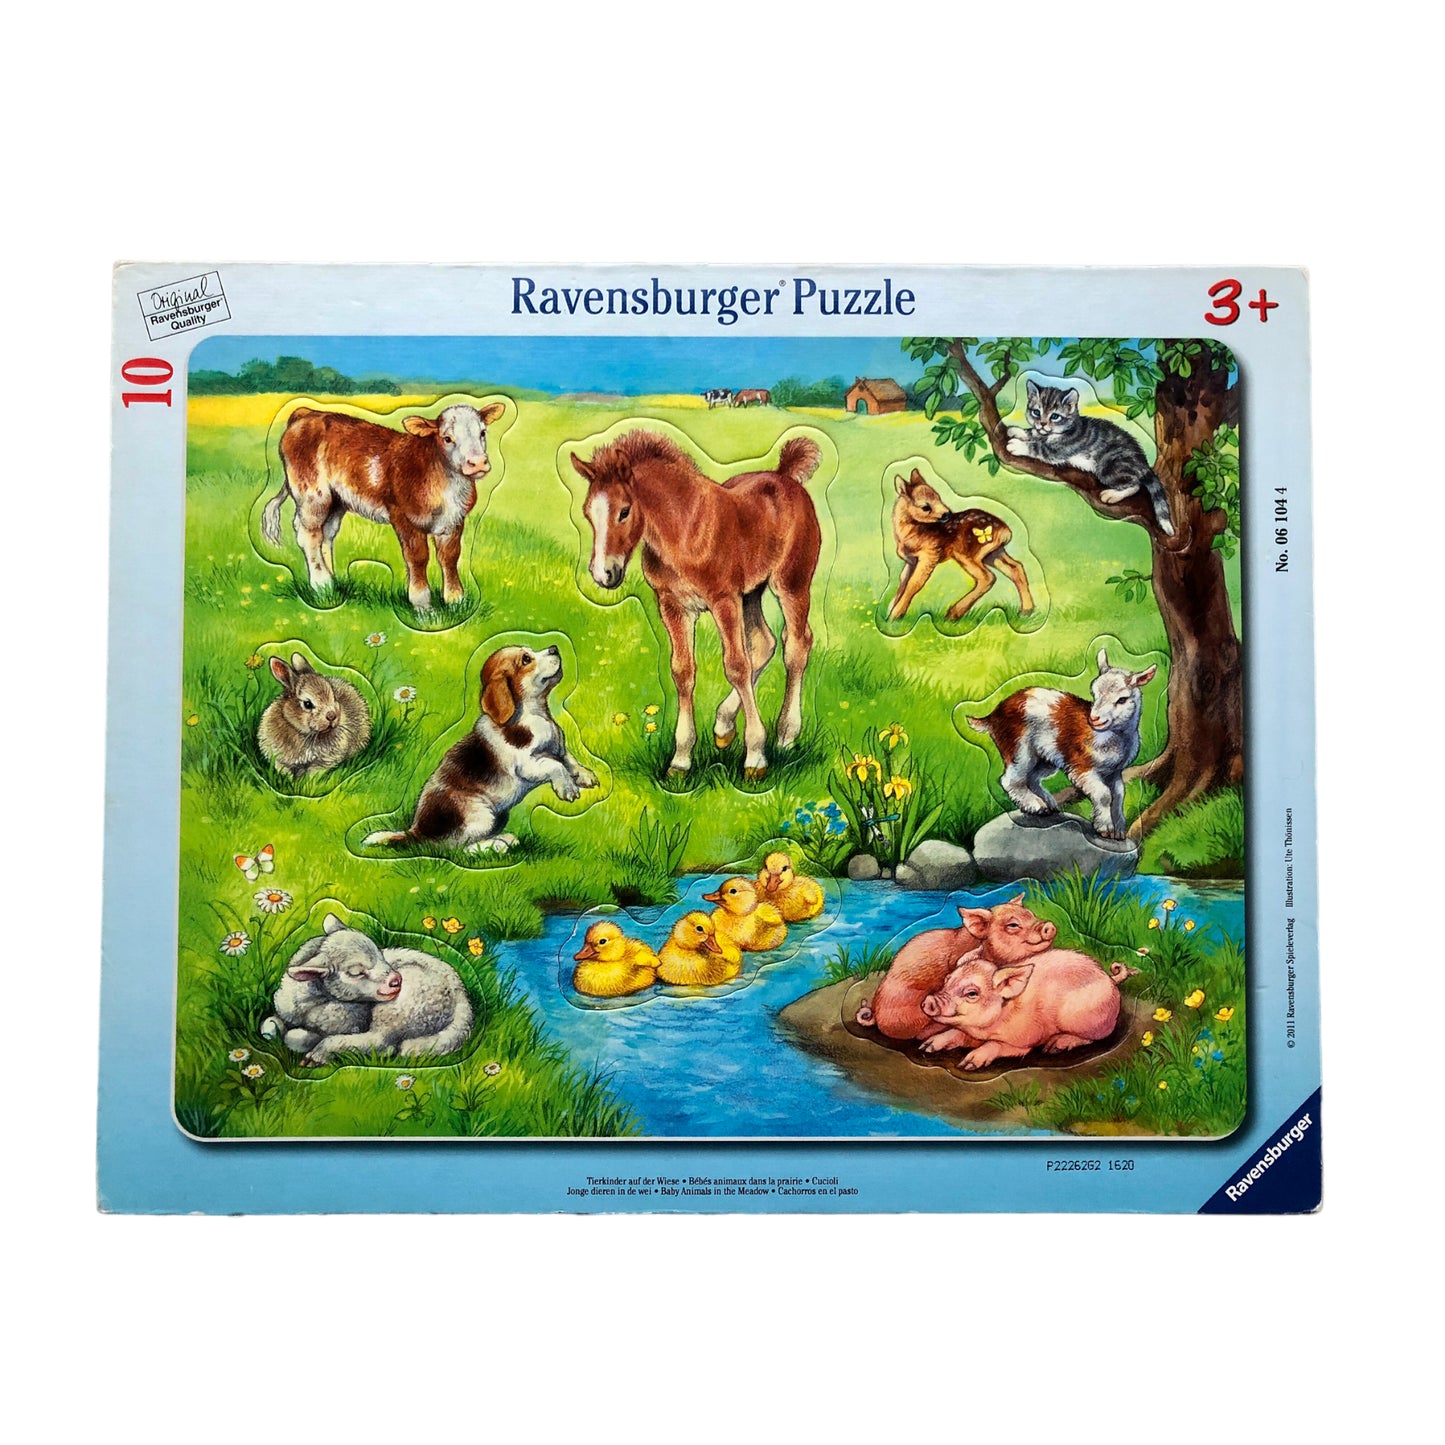 Ravensburger Puzzle - Baby Animals in the Meadow - 10 pieces